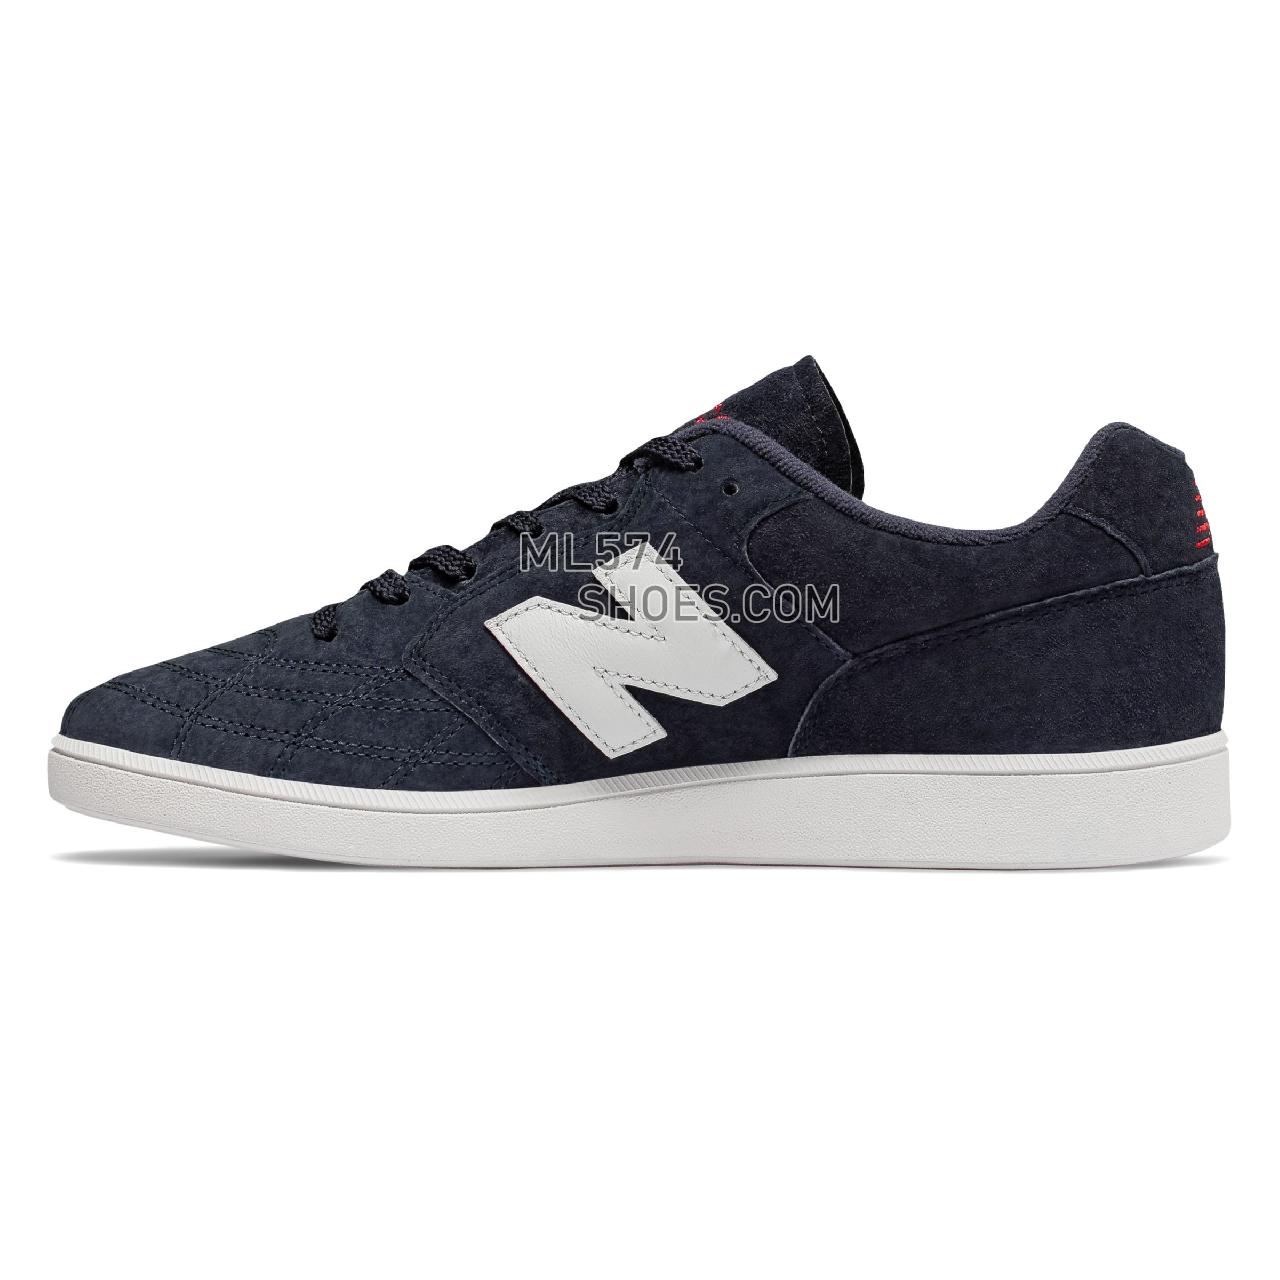 New Balance Epic TR National Pride - Men's  - Classic Navy with White - EPICTRAD